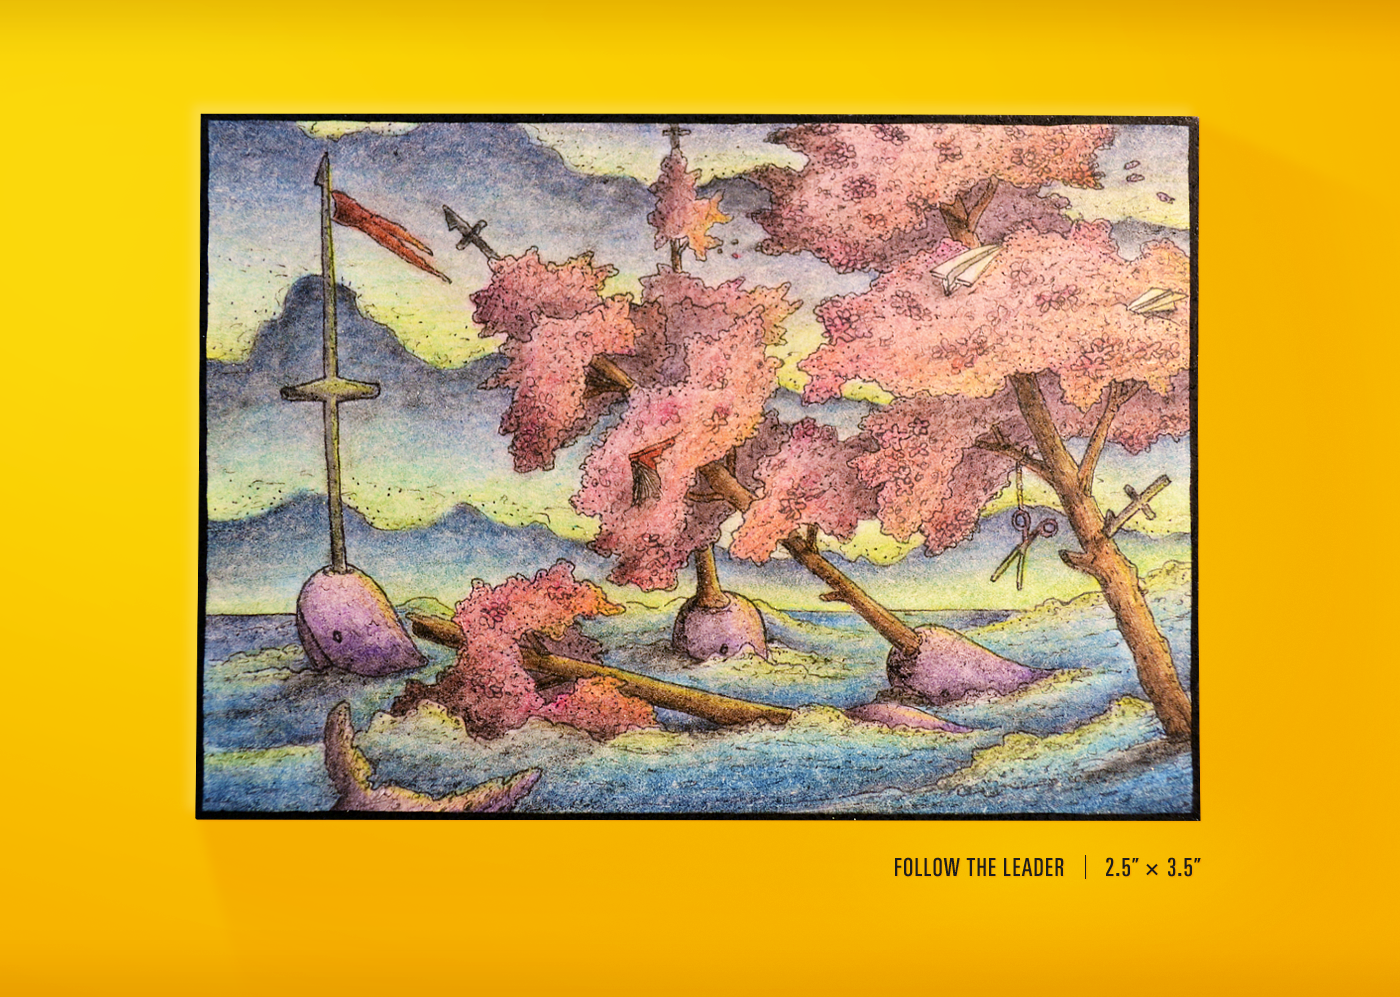 colored pencil art FINEART aceo art trading card fantasy surreal ILLUSTRATION  Drawing 